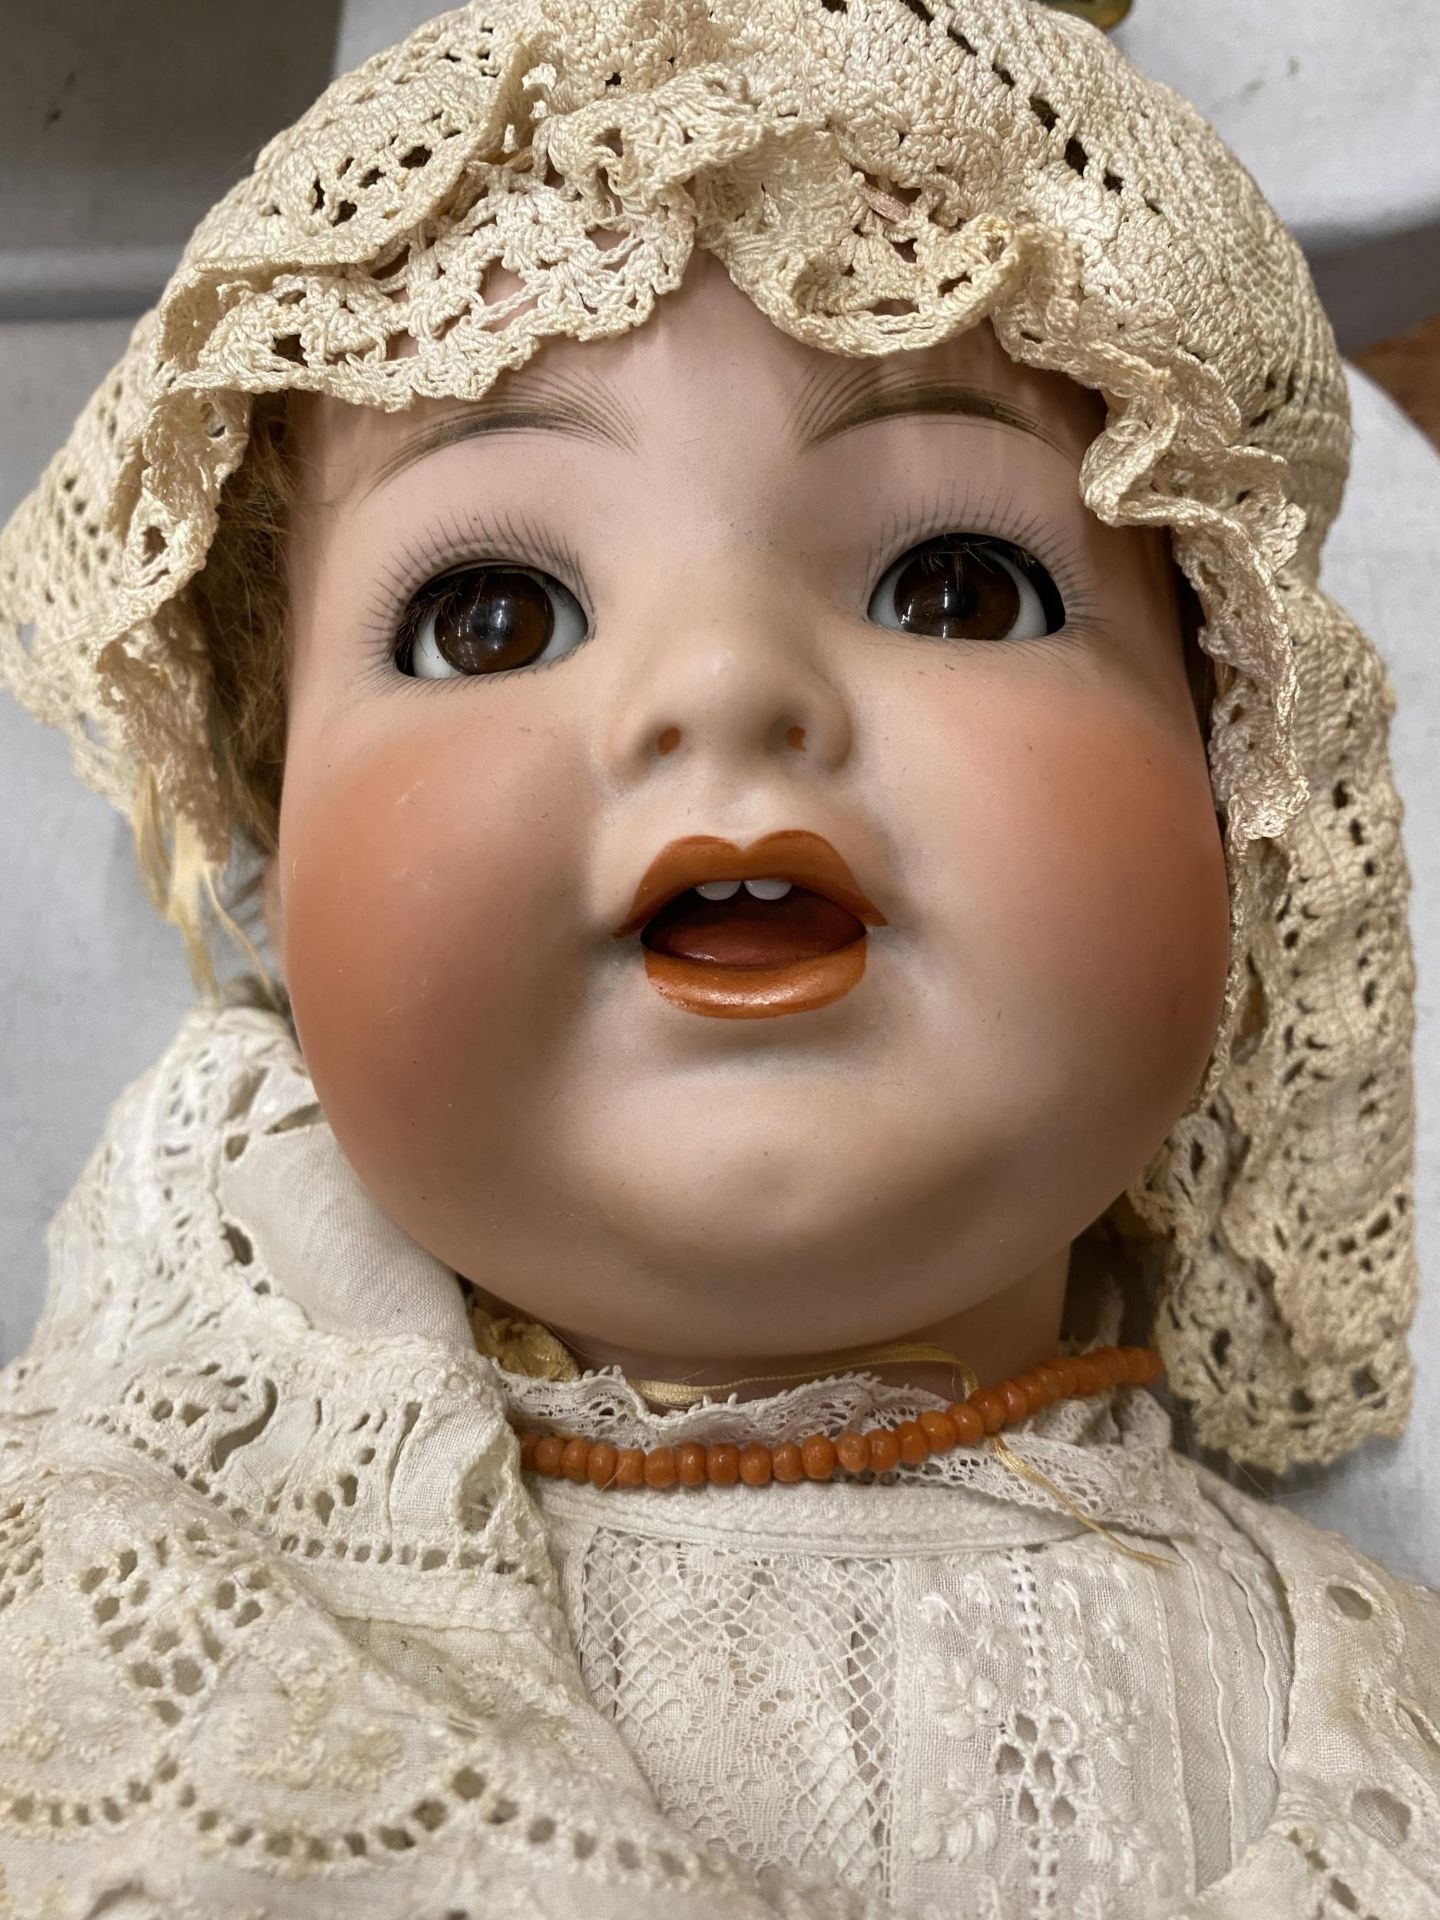 TWO VINTAGE DOLLS, ONE LARGE WITH A CERAMIC HEAD MARKED GERMANY, THE OTHER MARKED 'ROSEBUD' - Image 2 of 5